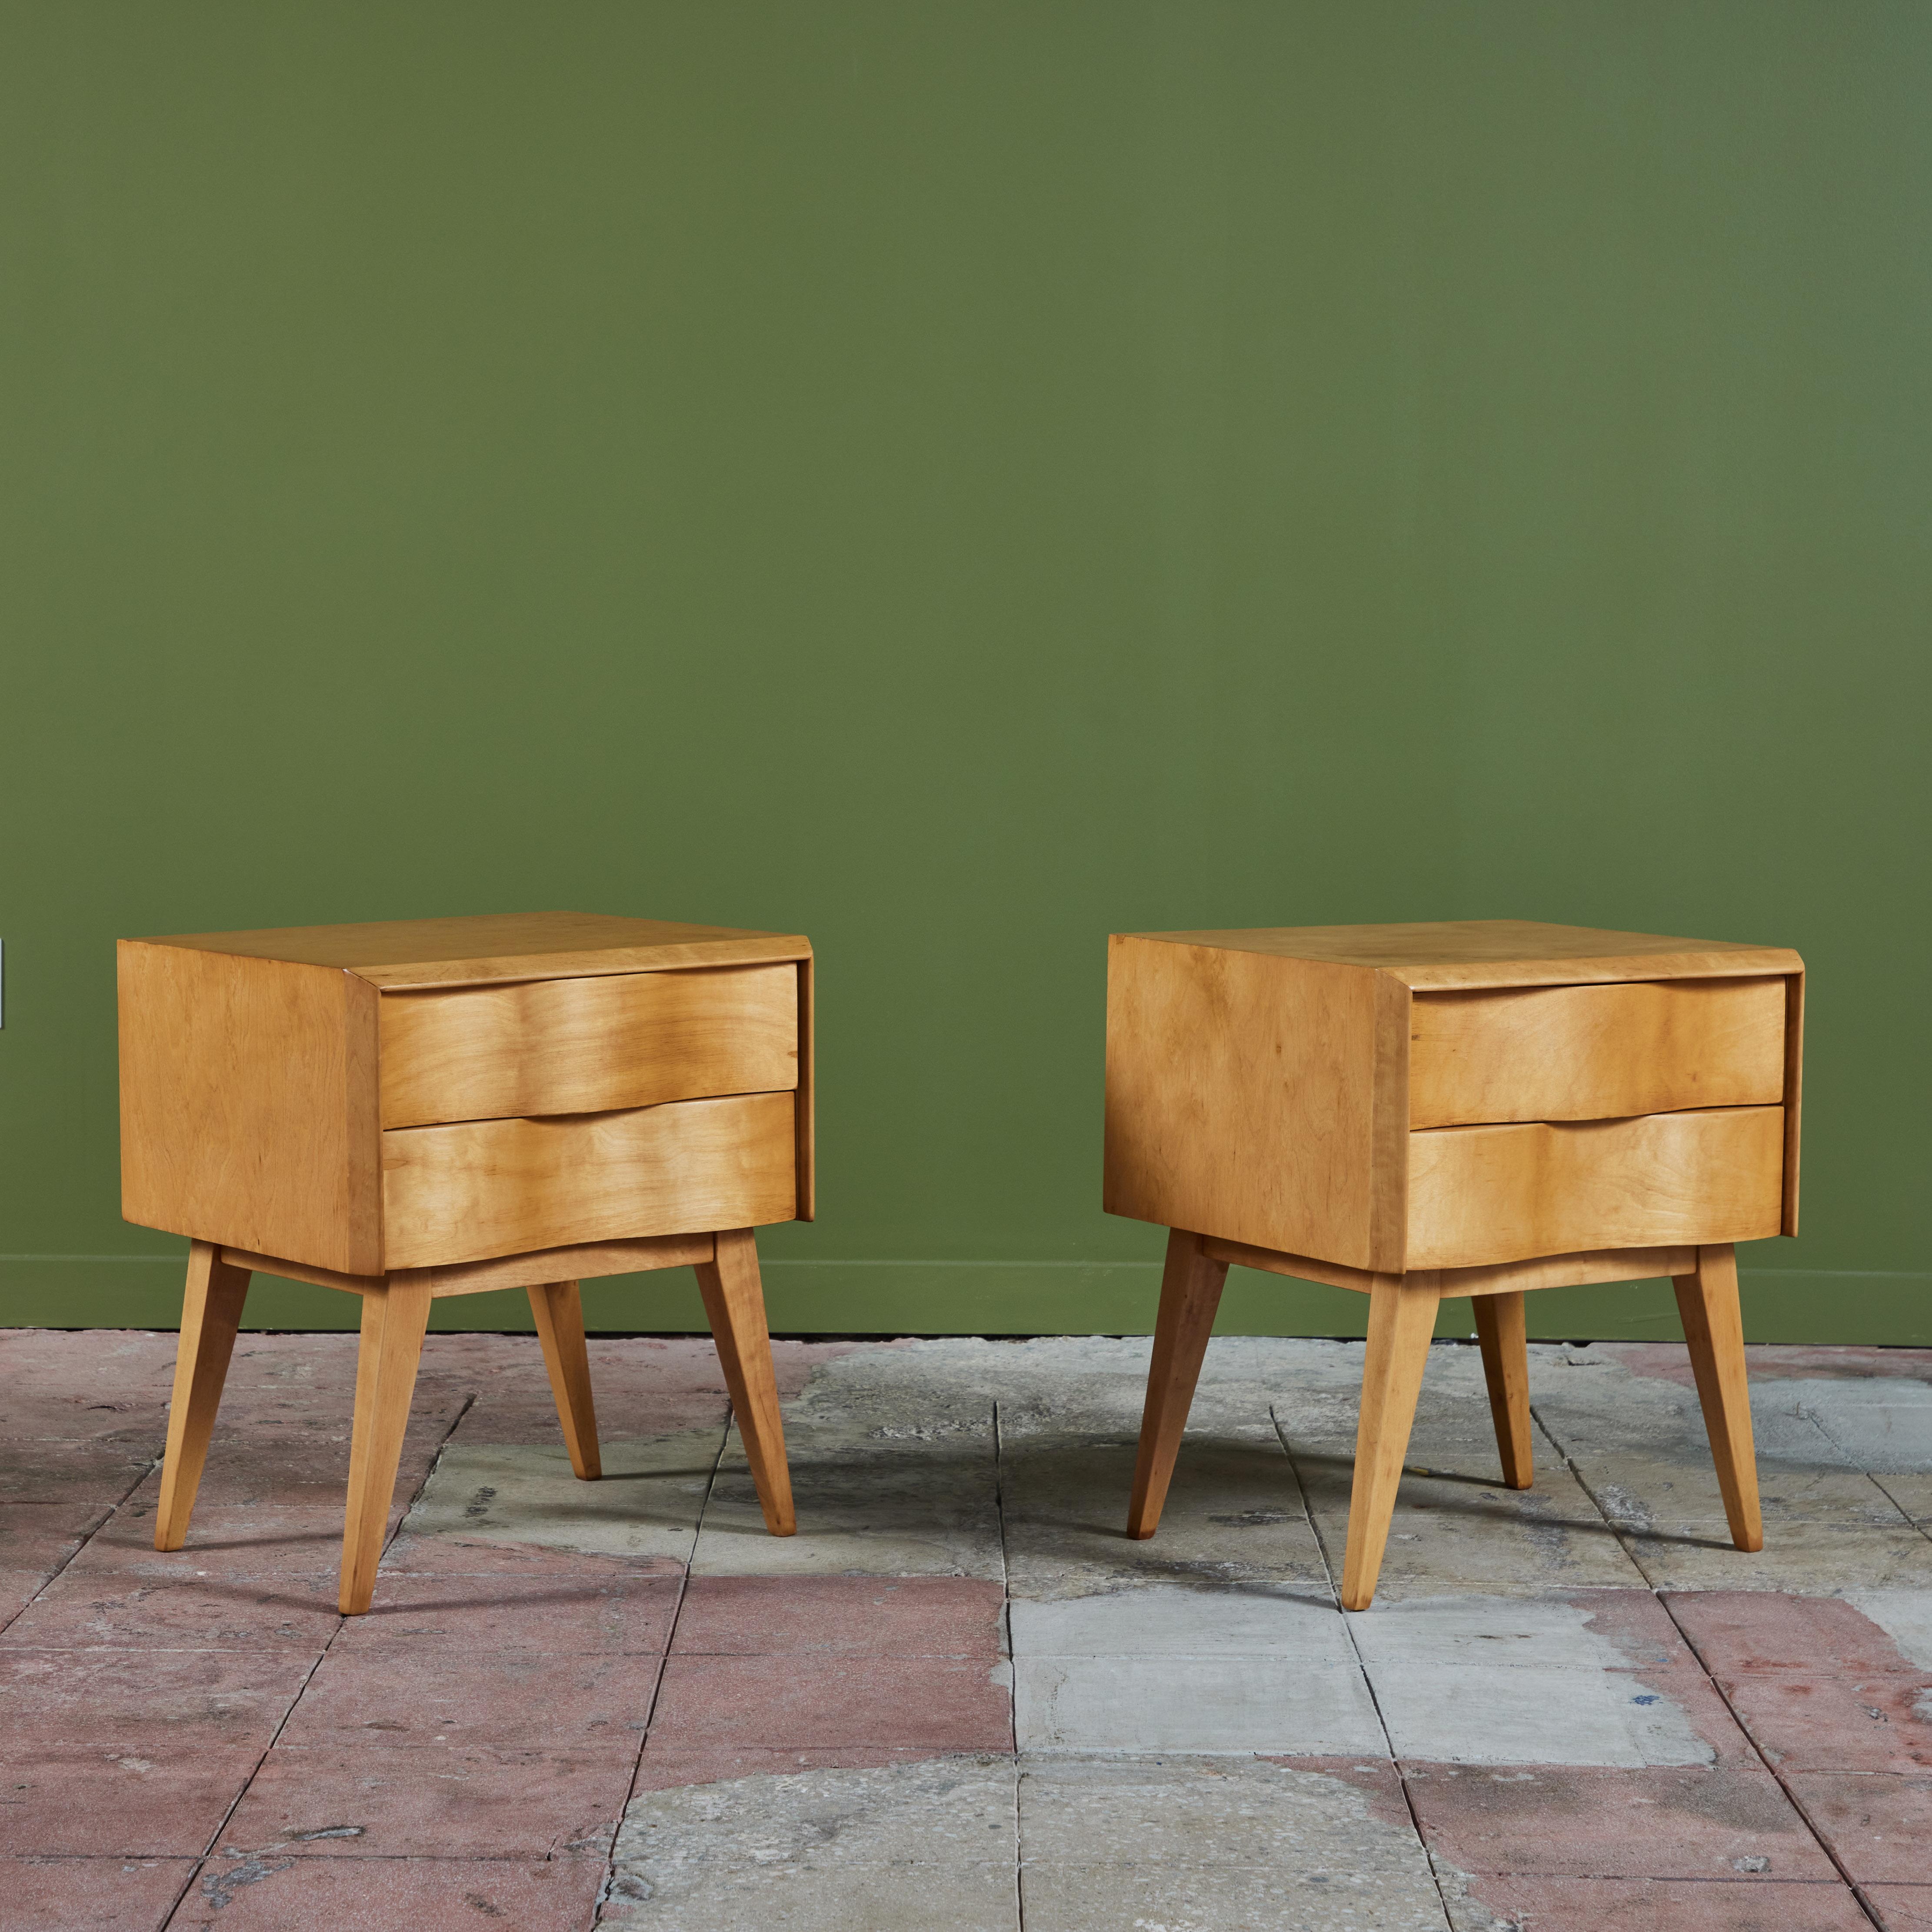 Pair of nightstands by Edmond Spence, c.1950s, Sweden. The maple nightstands feature two drawers with a unique sculpted wave front design. The stands rest on four splayed legs.

Dimensions
21